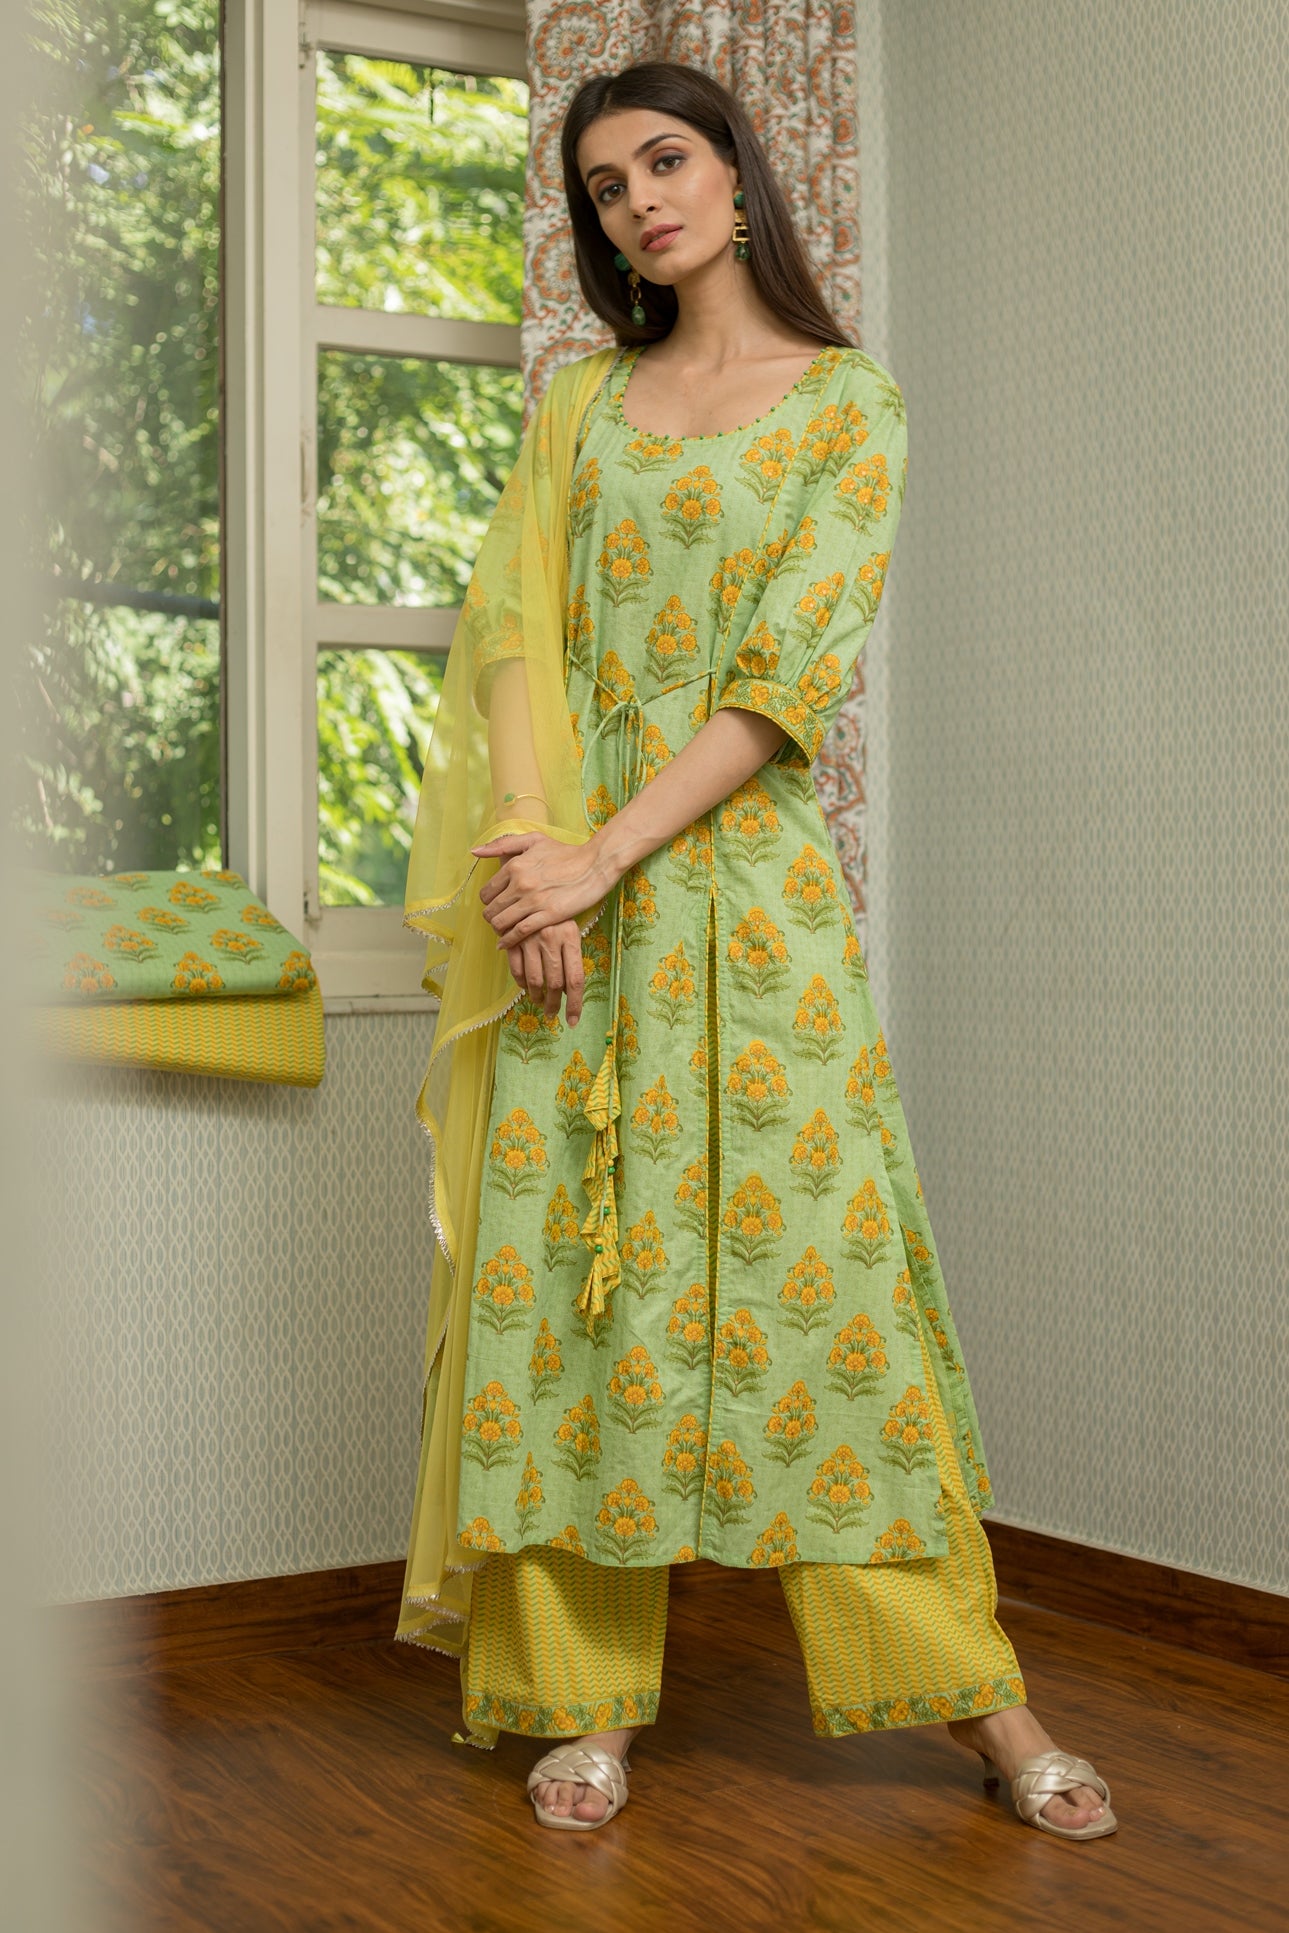 Spring Green and Chrome Yellow Premium Cotton Suit Set With Net Dupatta (A108K3GRN)